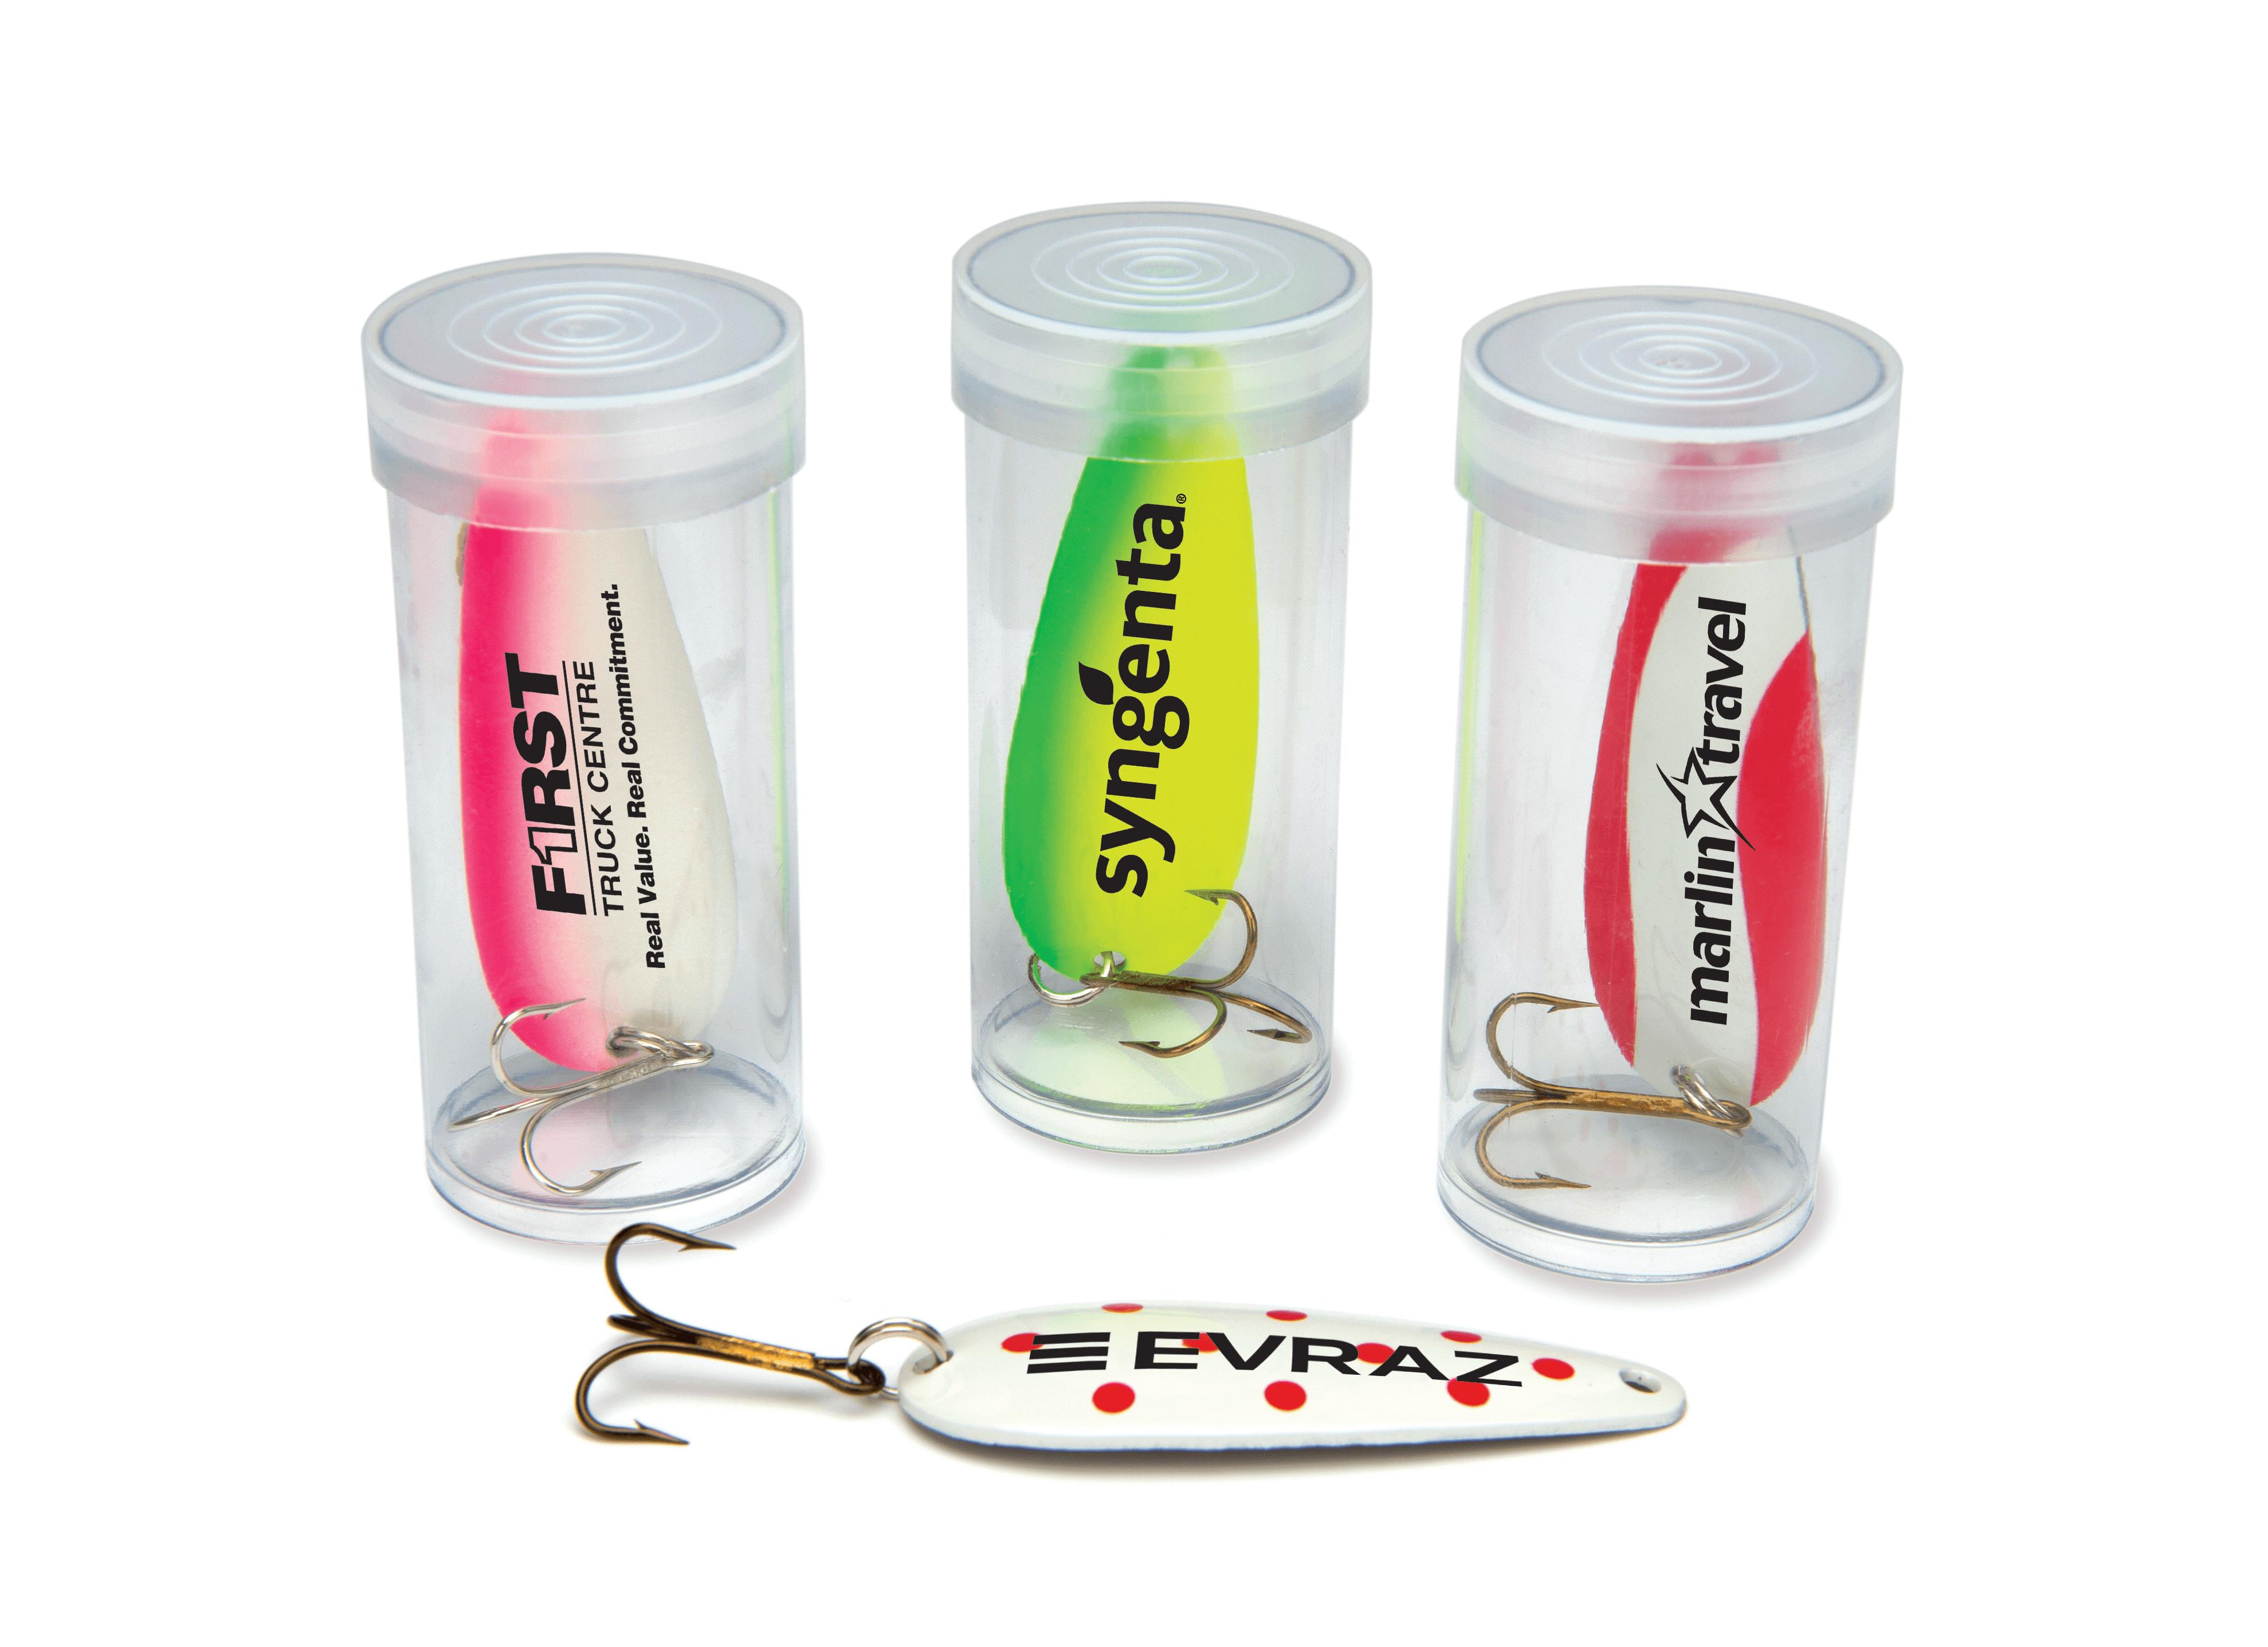 Lucky Strike Lure in a Tube - Just Direct Promotions